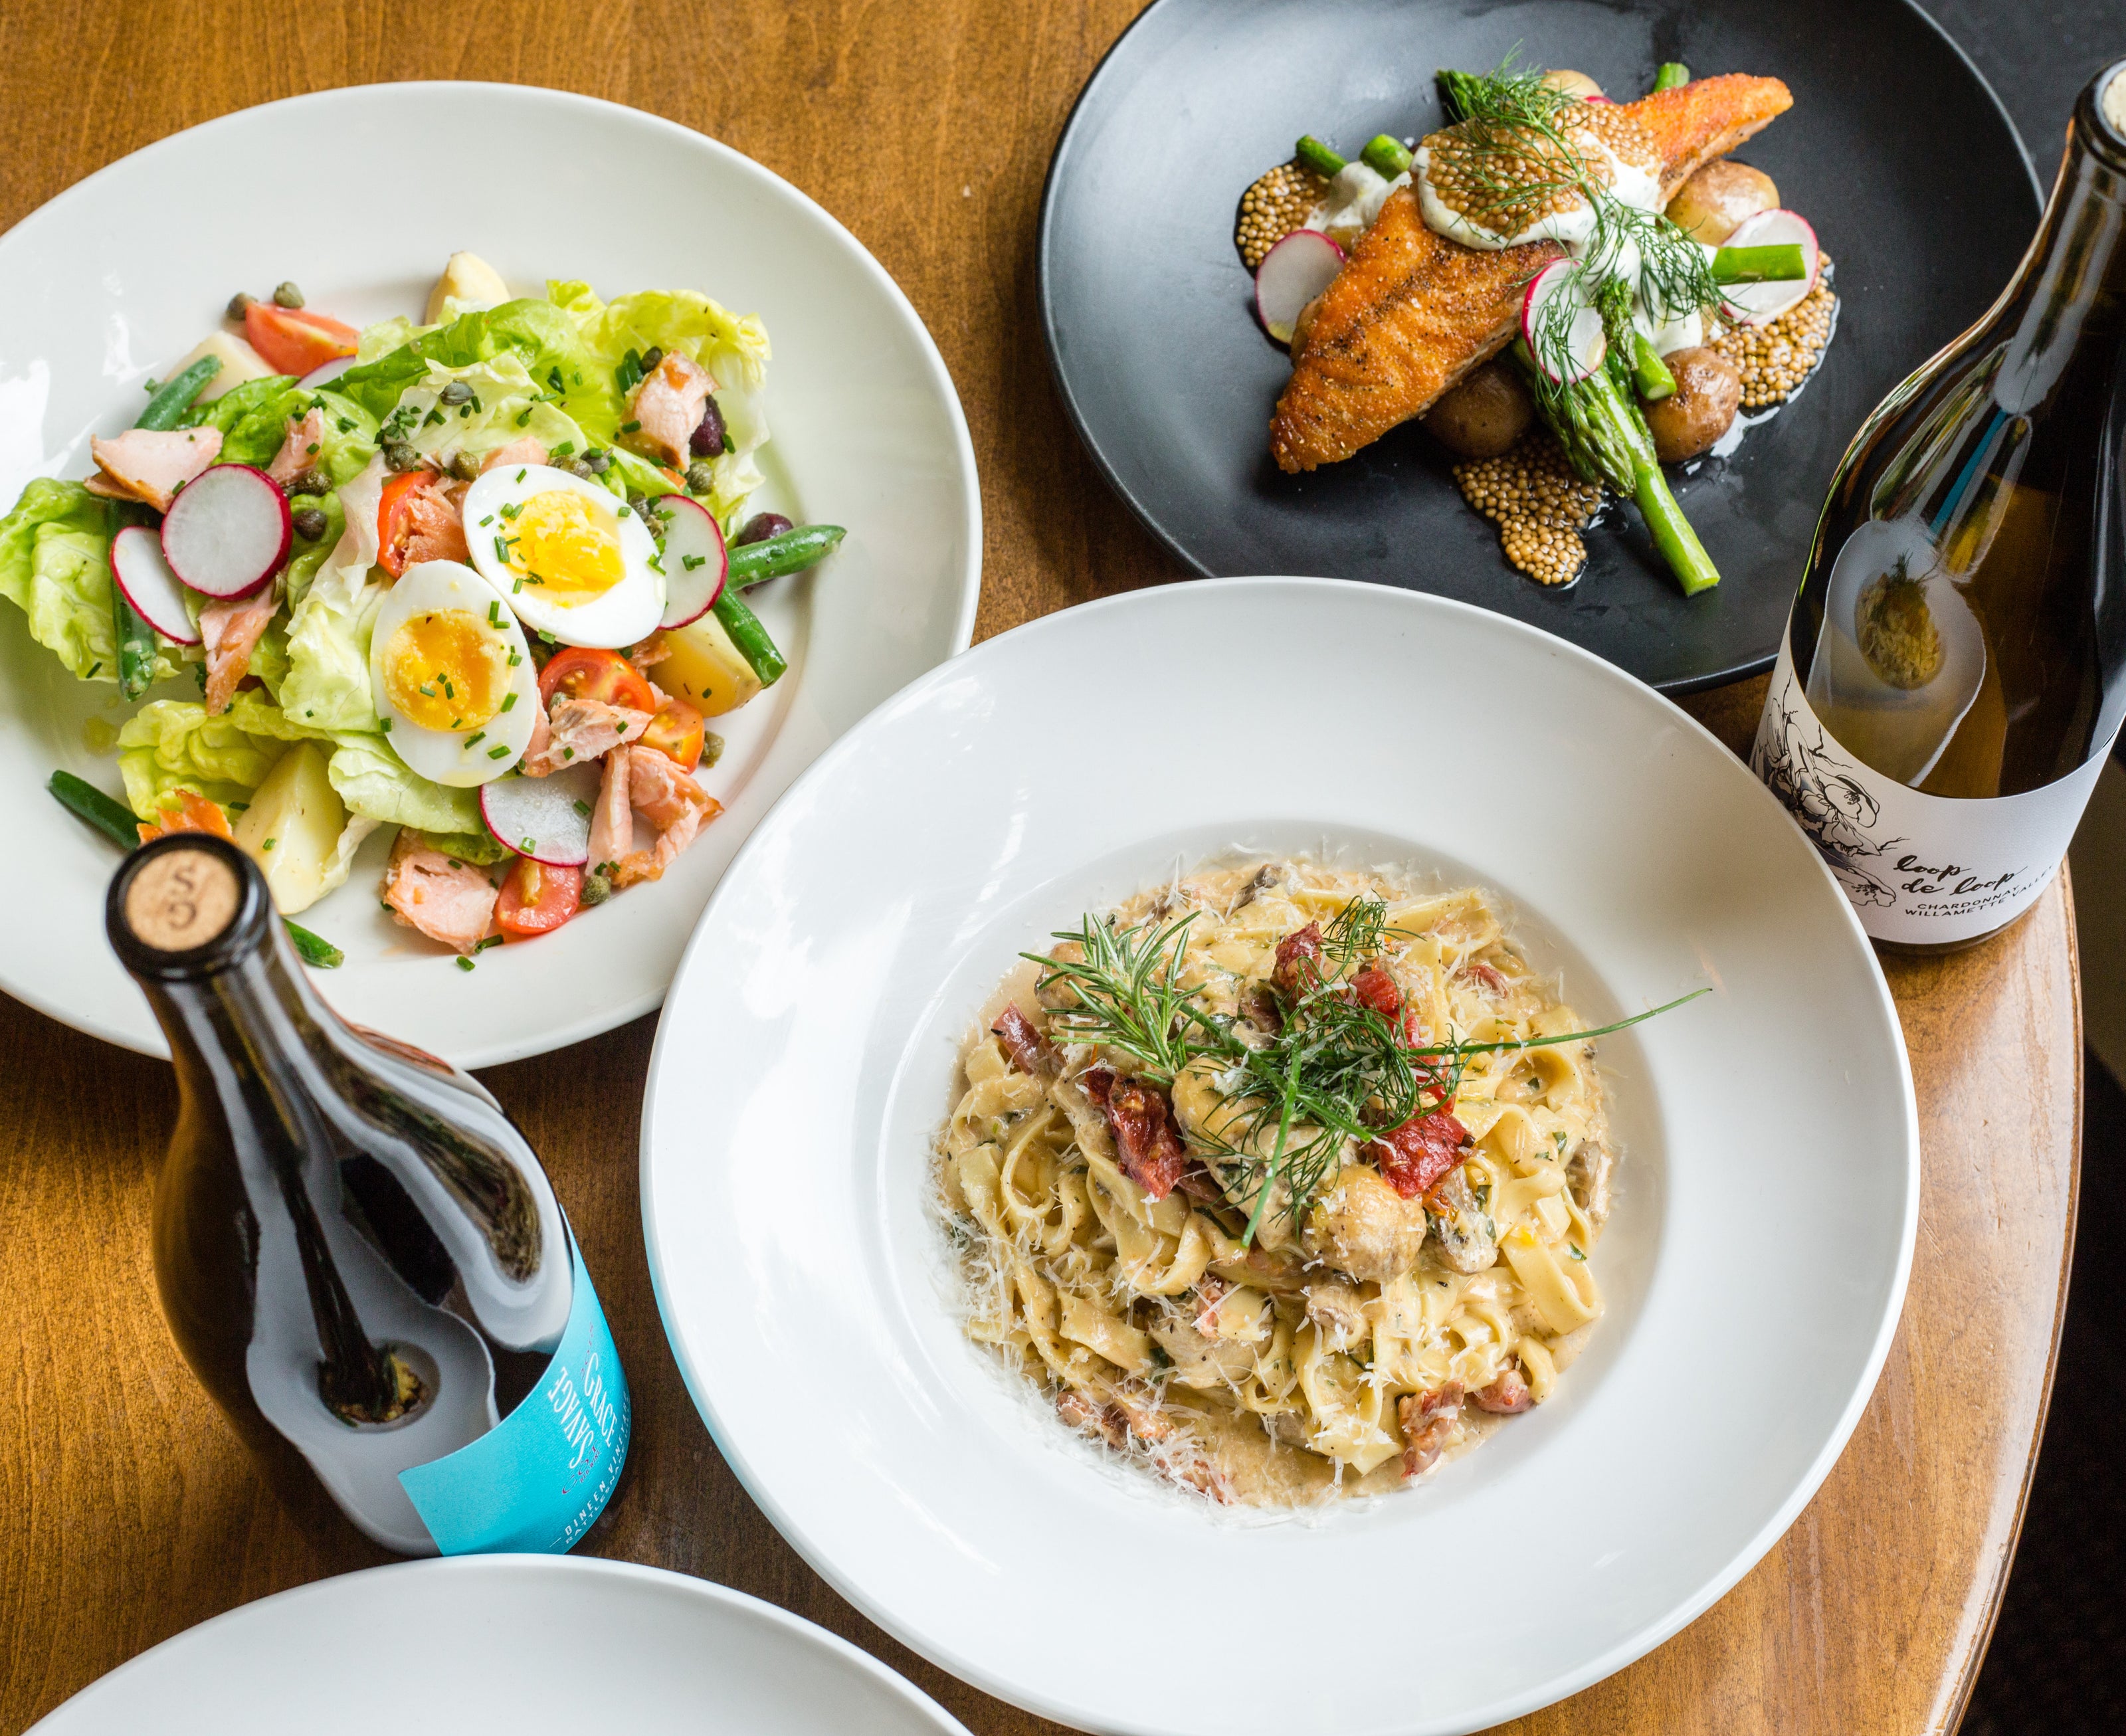 A spread of dishes on the Papa Haydn lunch and dinner menu, including creamy chicken pasta, salad nicoise, and salmon 